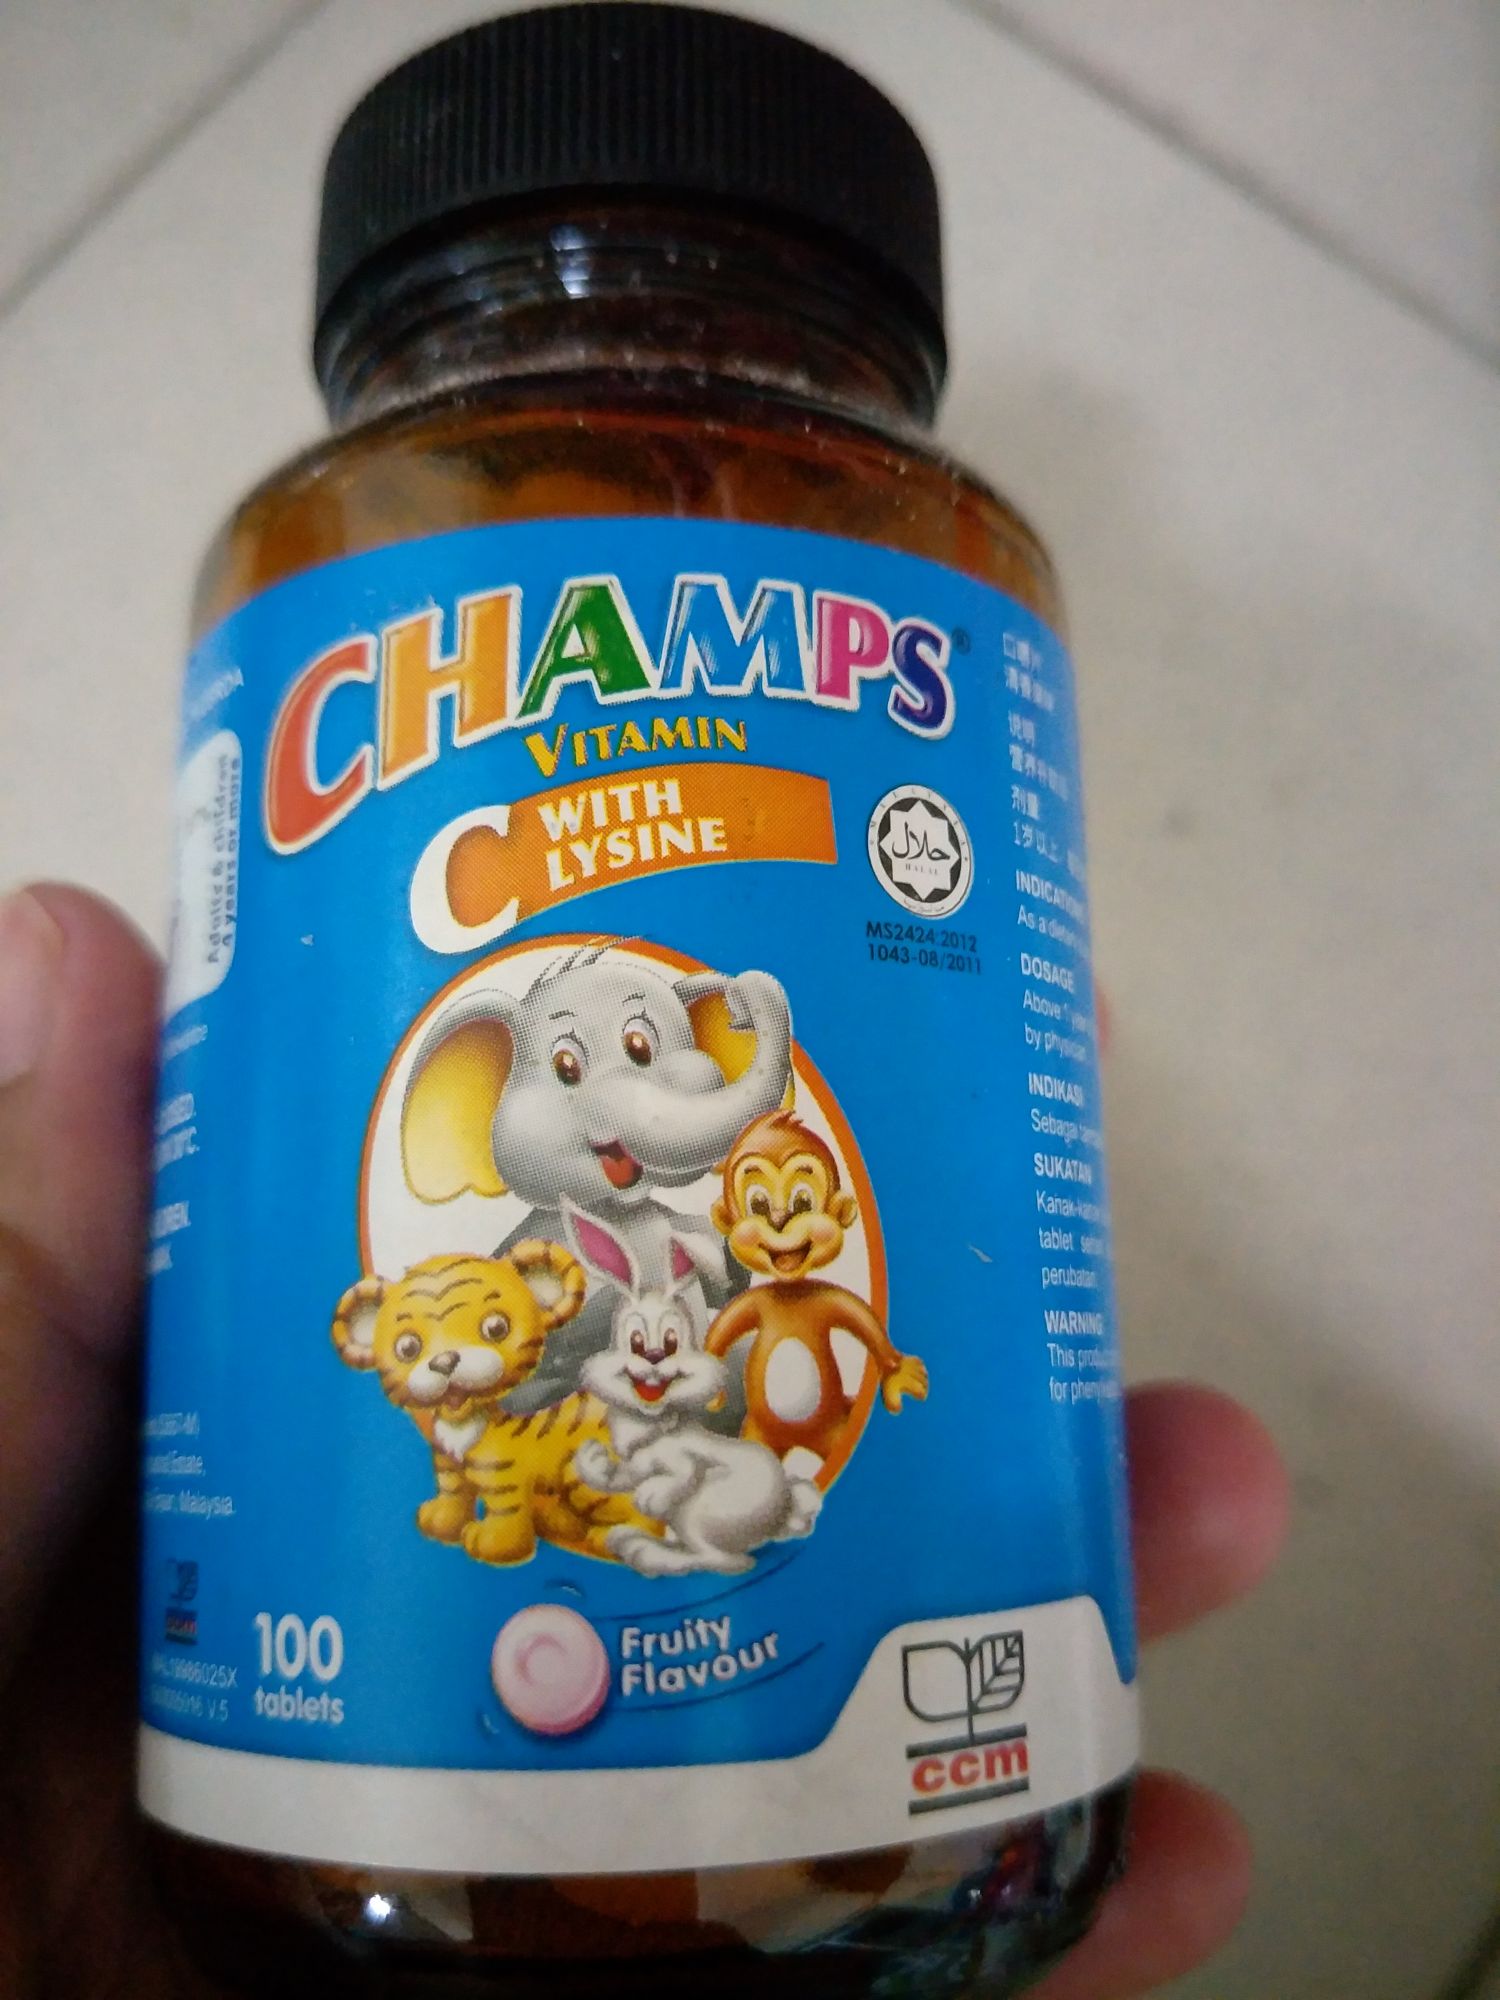 CHAMPS C VITAMIN C WITH LYSINE TAB 100'S reviews